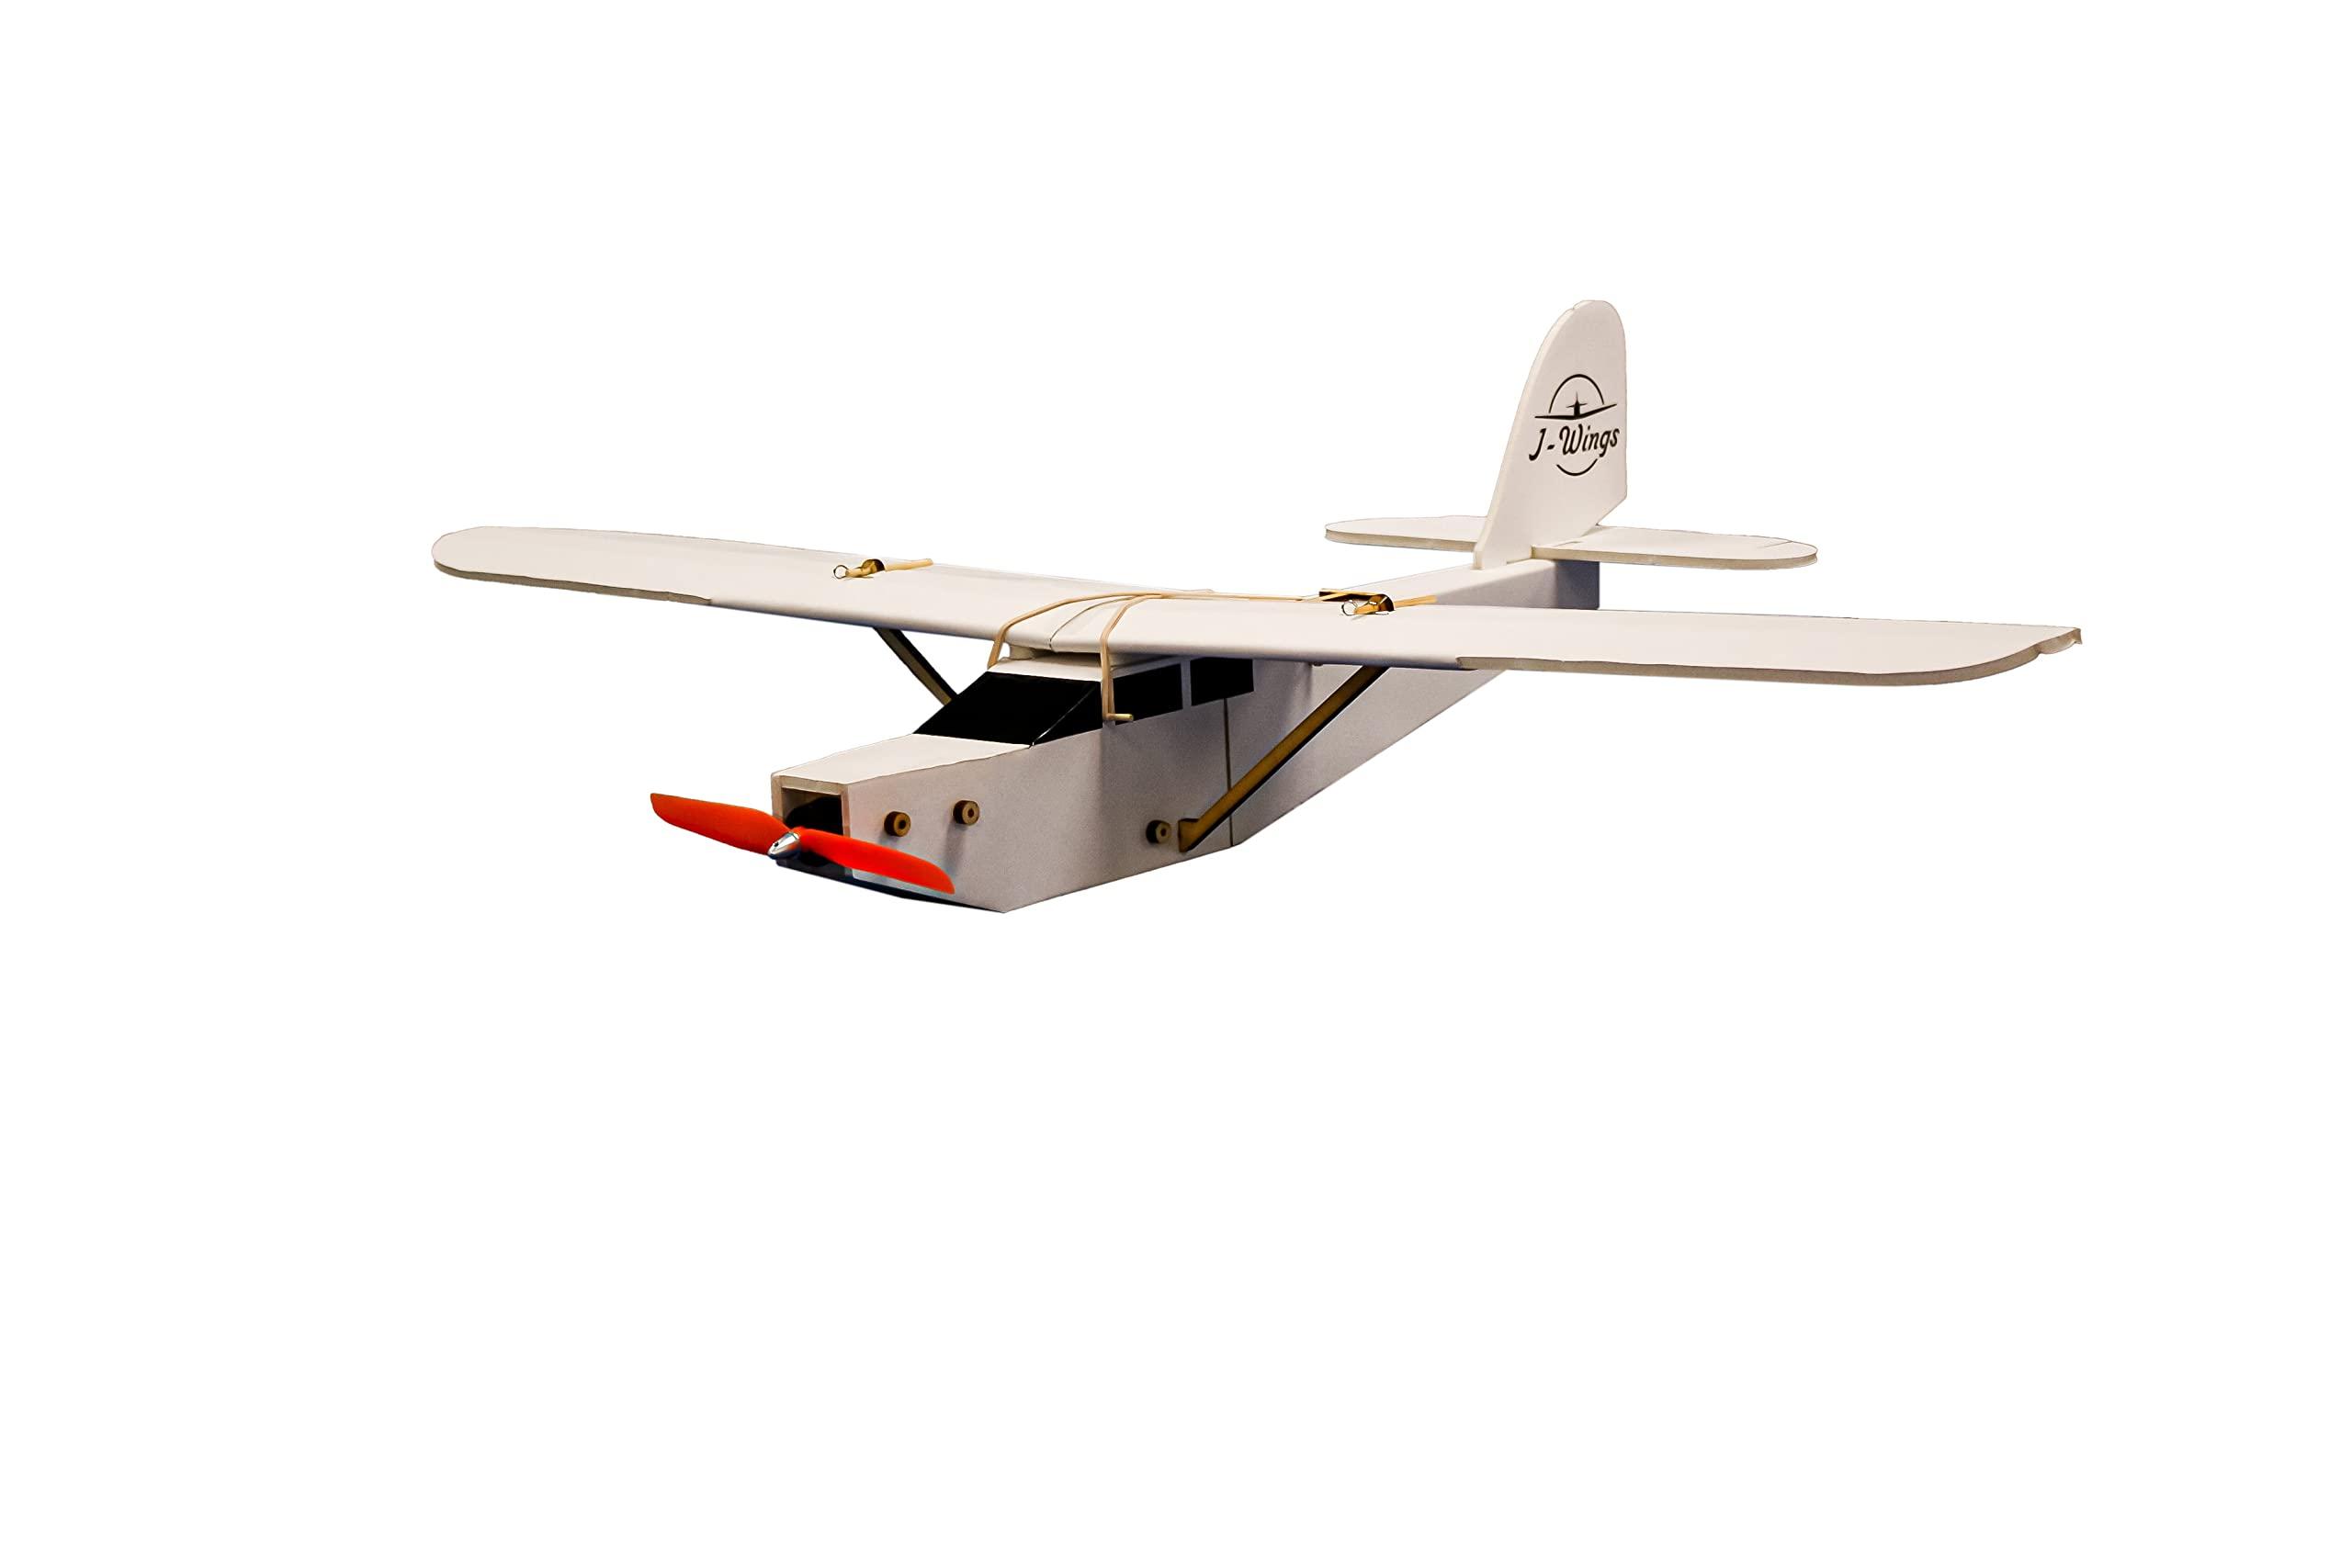 Starter Rc Airplane: Top materials used in starter RC airplanes: Foam, Balsa, and Carbon Fiber